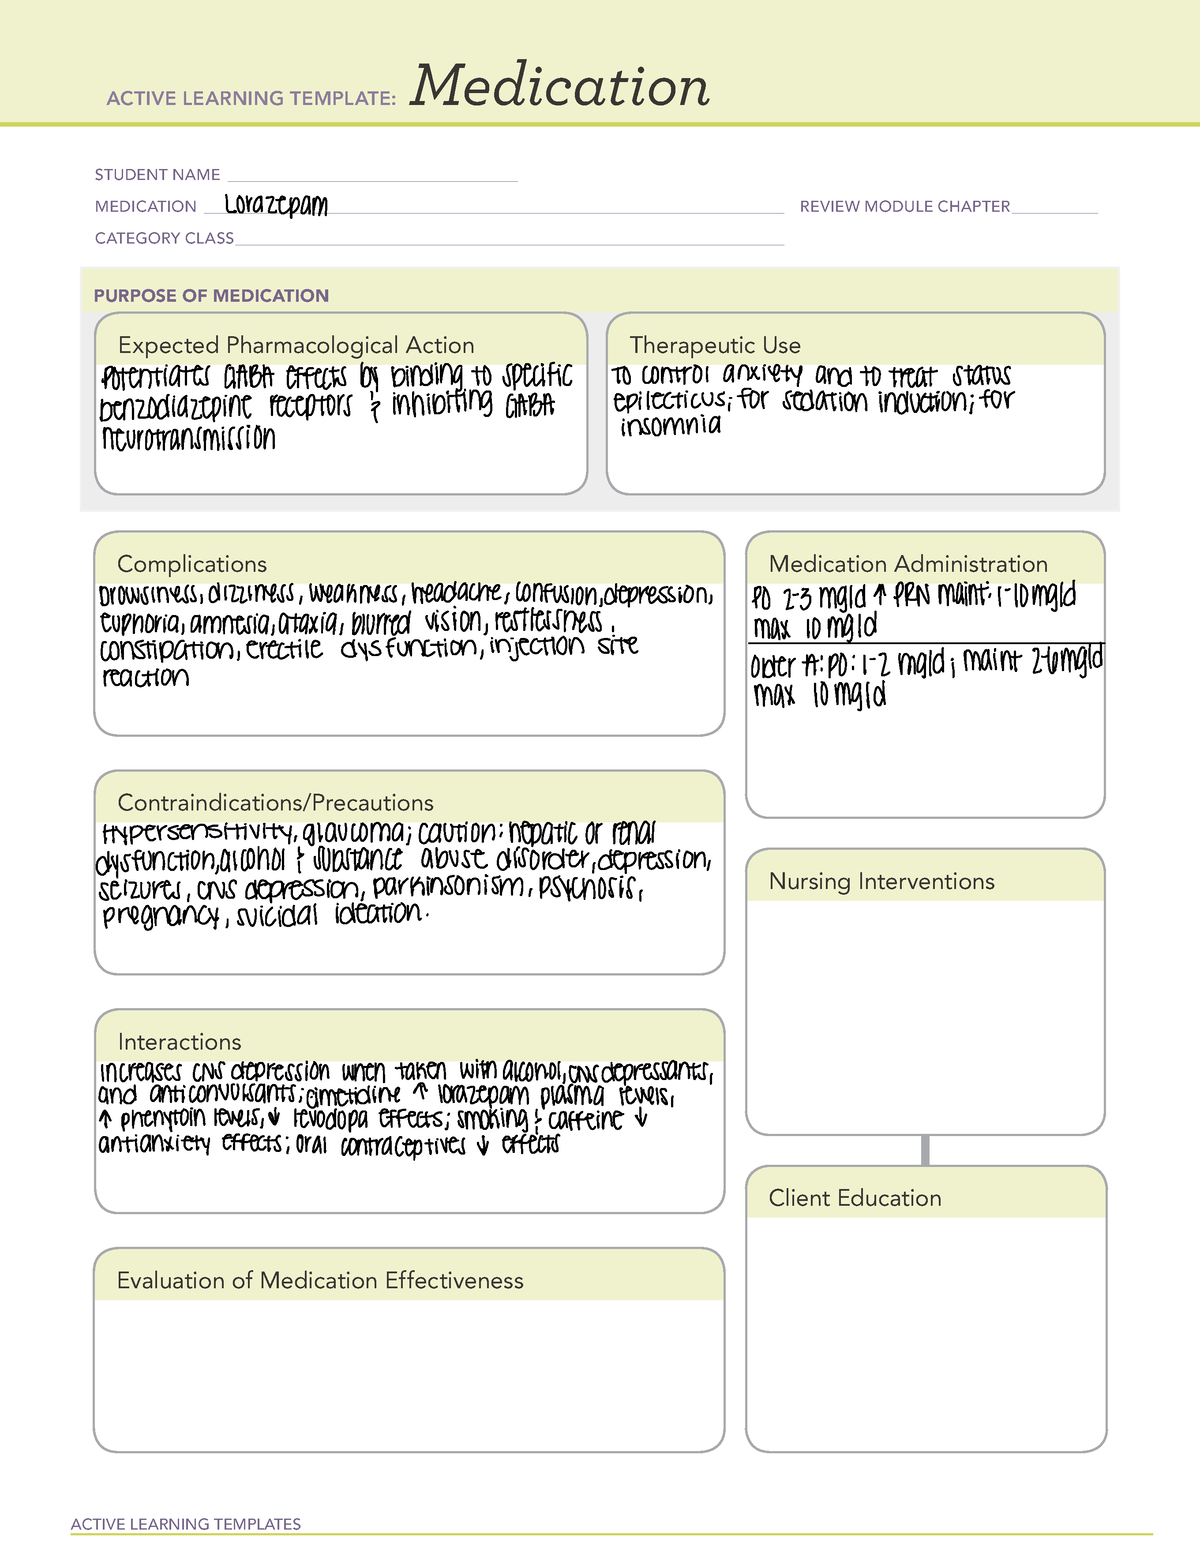 active-learning-template-lorazepam-active-learning-templates